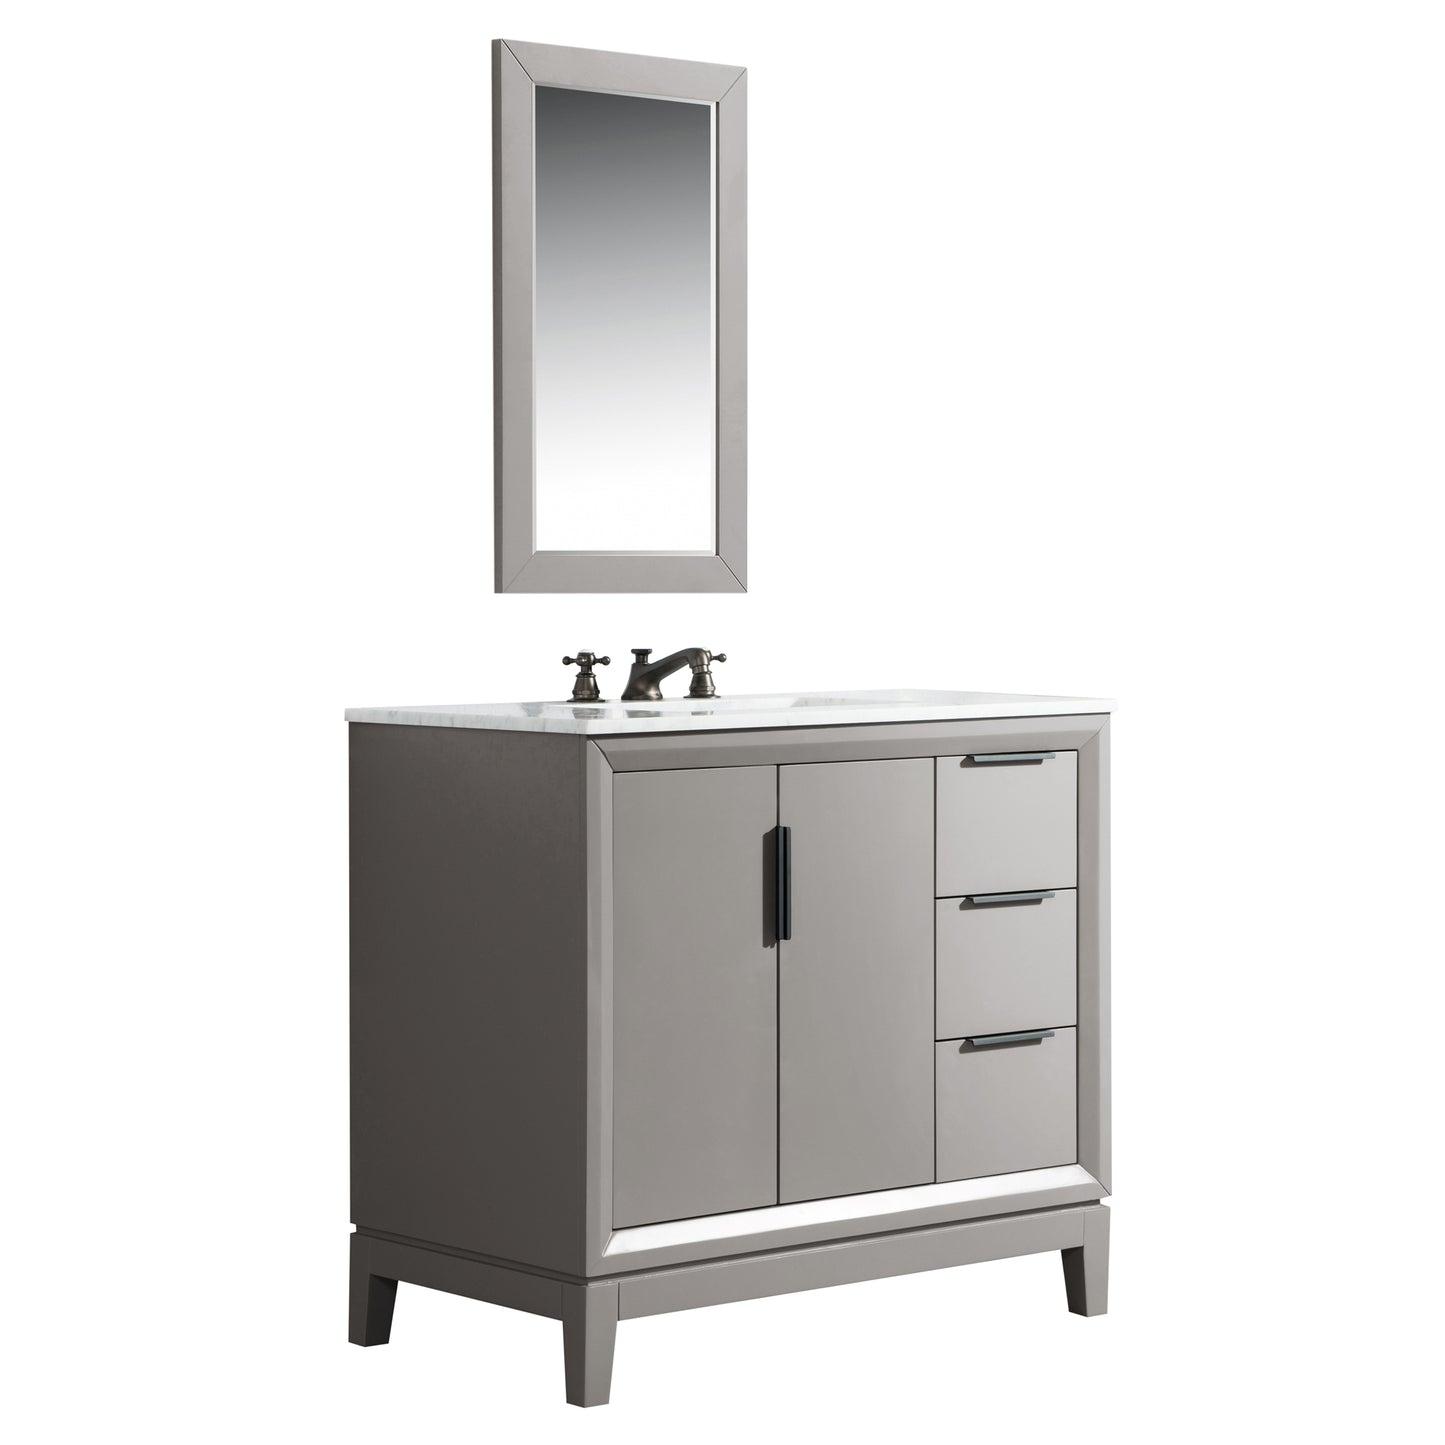 Water Creation Elizabeth 36" Inch Single Sink Carrara White Marble Vanity with Matching Mirror and Lavatory Faucet - Luxe Bathroom Vanities